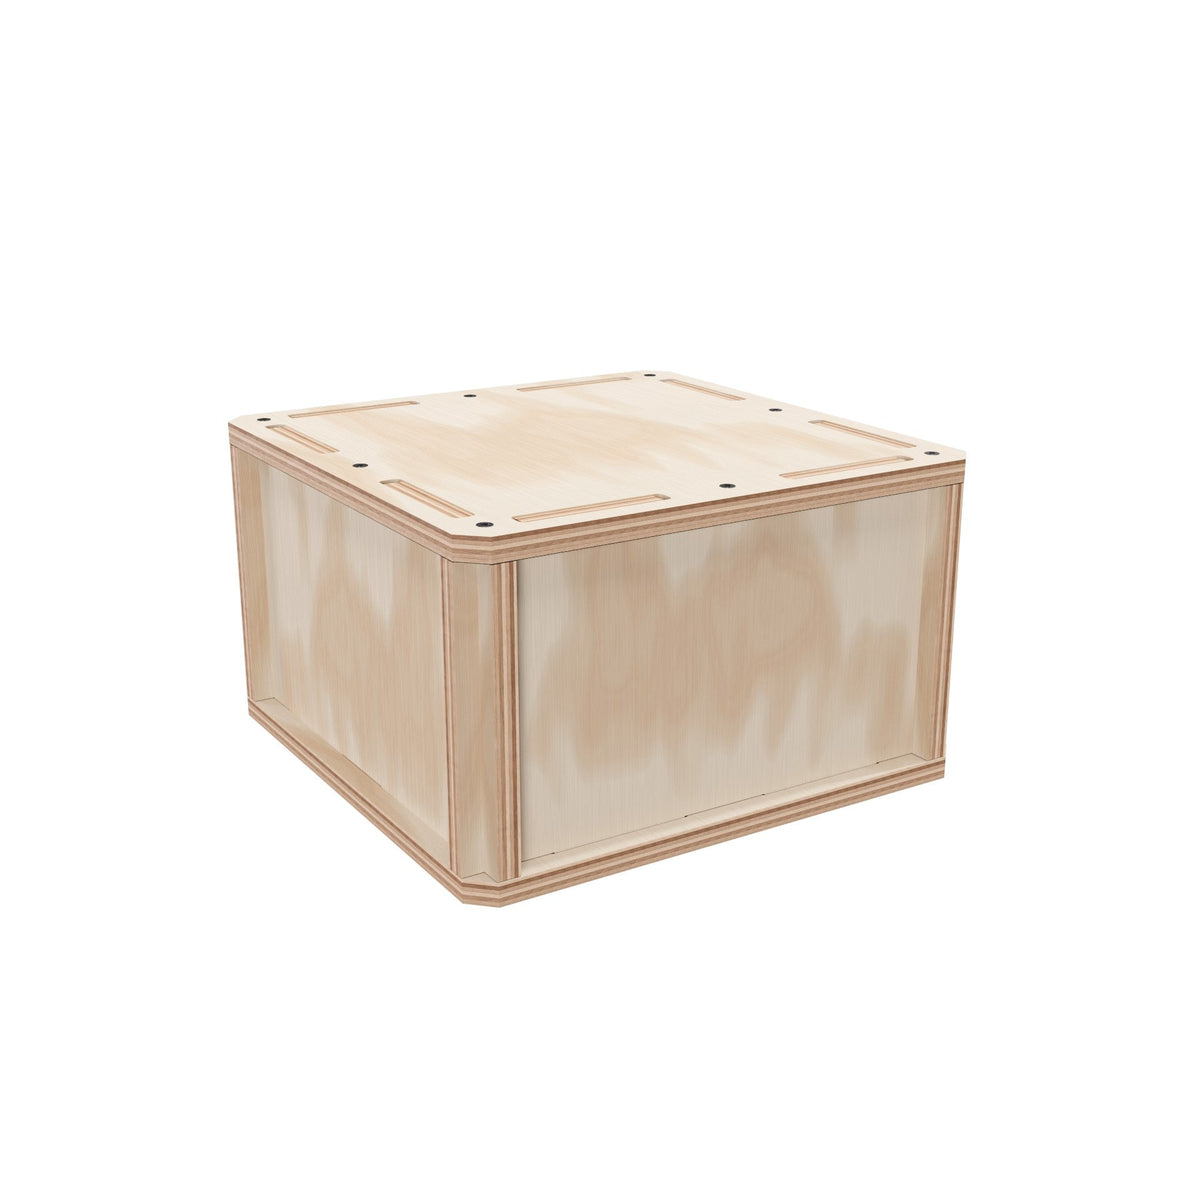 Plywood Shipping Crate 12x12x7